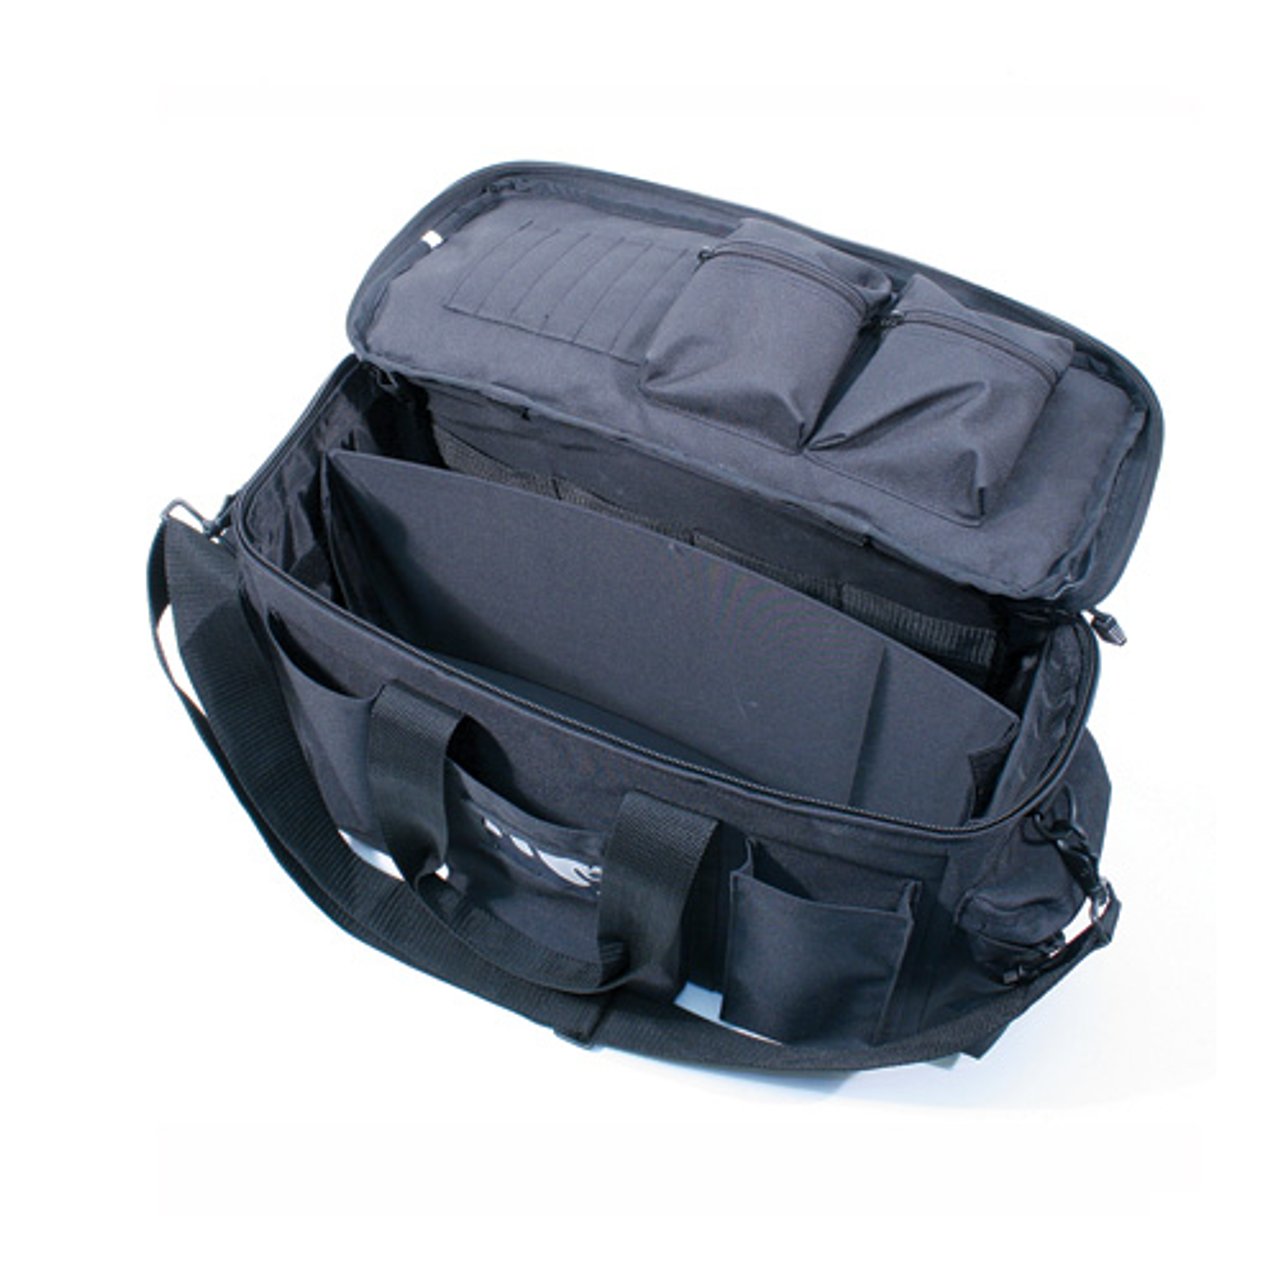 Police Equipment Bag low price of $76.95